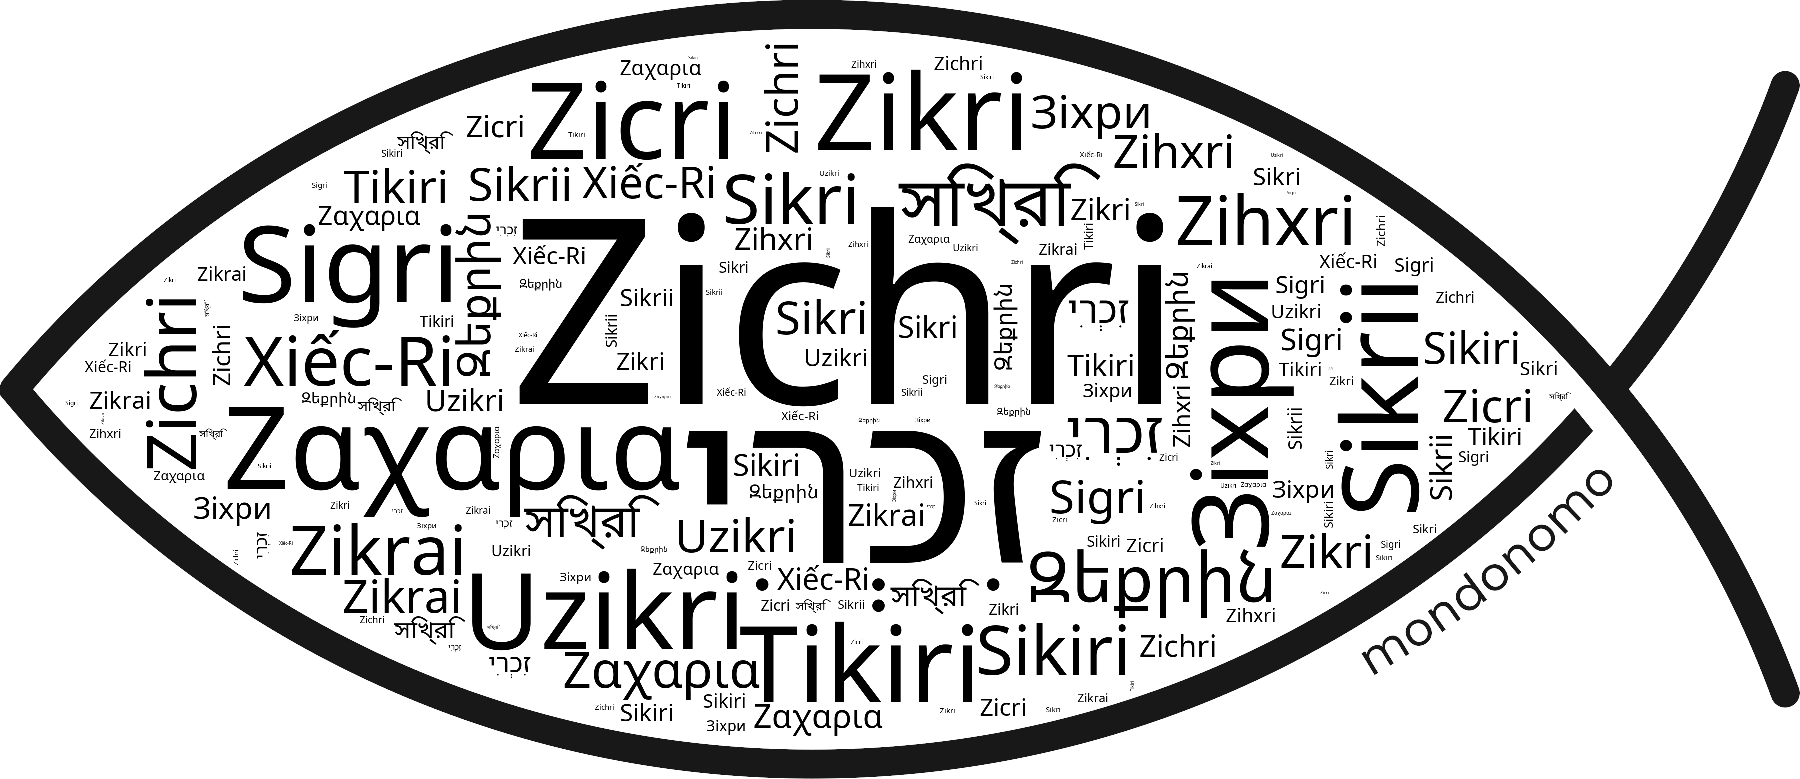 Name Zichri in the world's Bibles